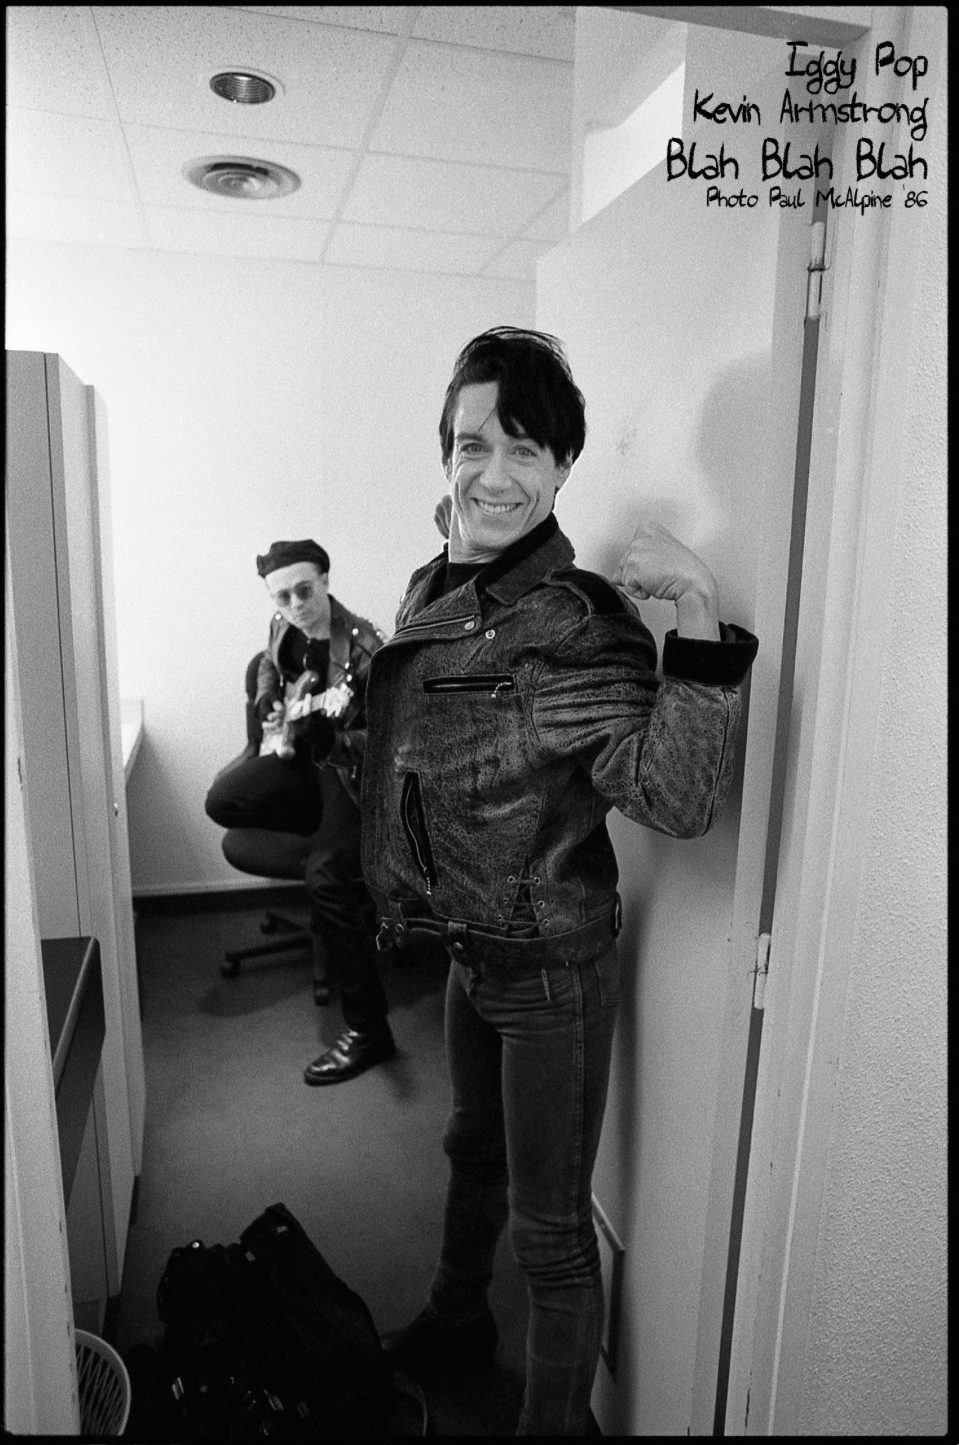 Paul McAlpine photo of Iggy Pop and Kevin Armstrong